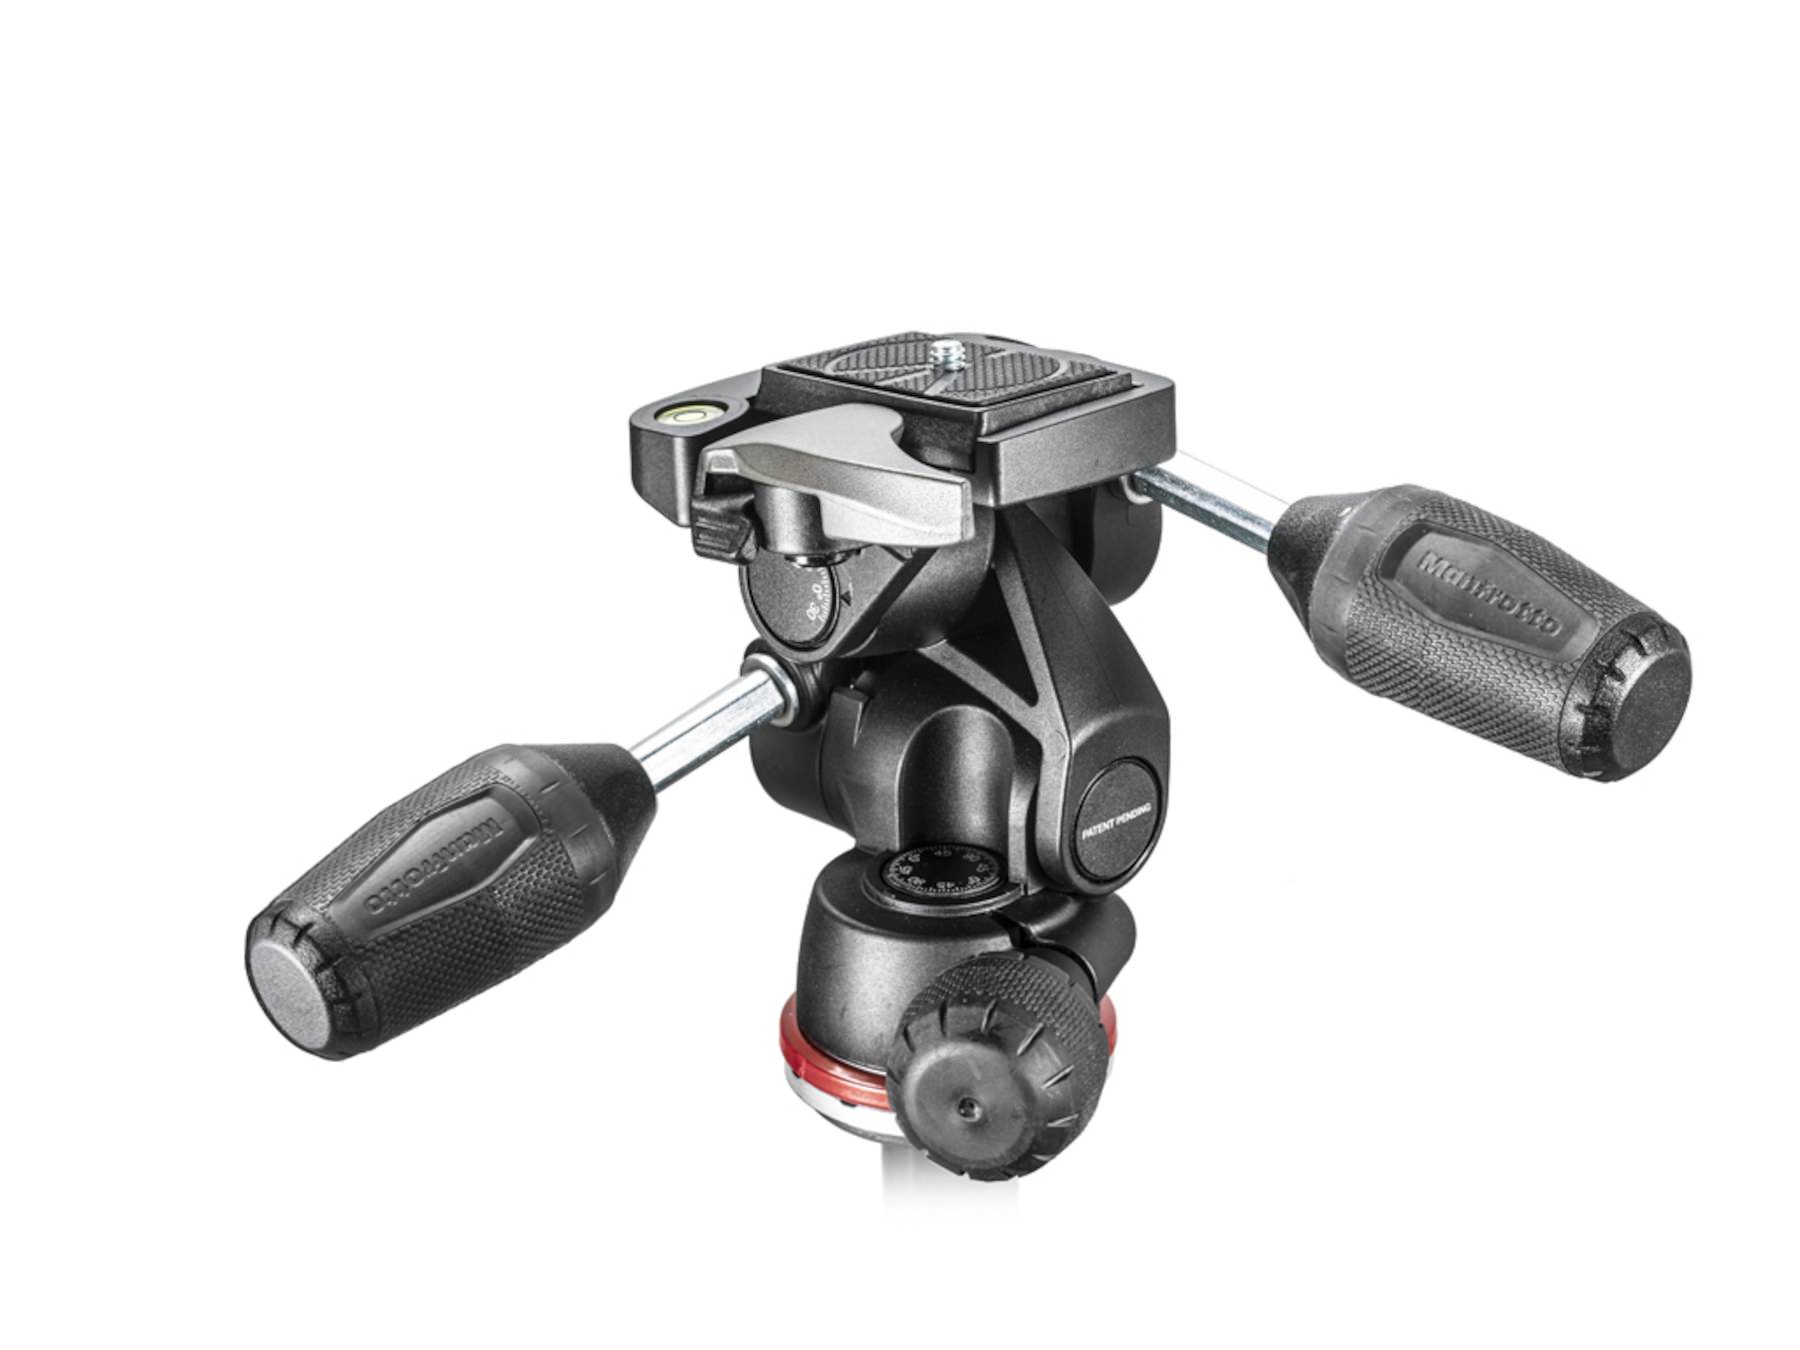 Manfrotto MH804-3W 3-Way Head